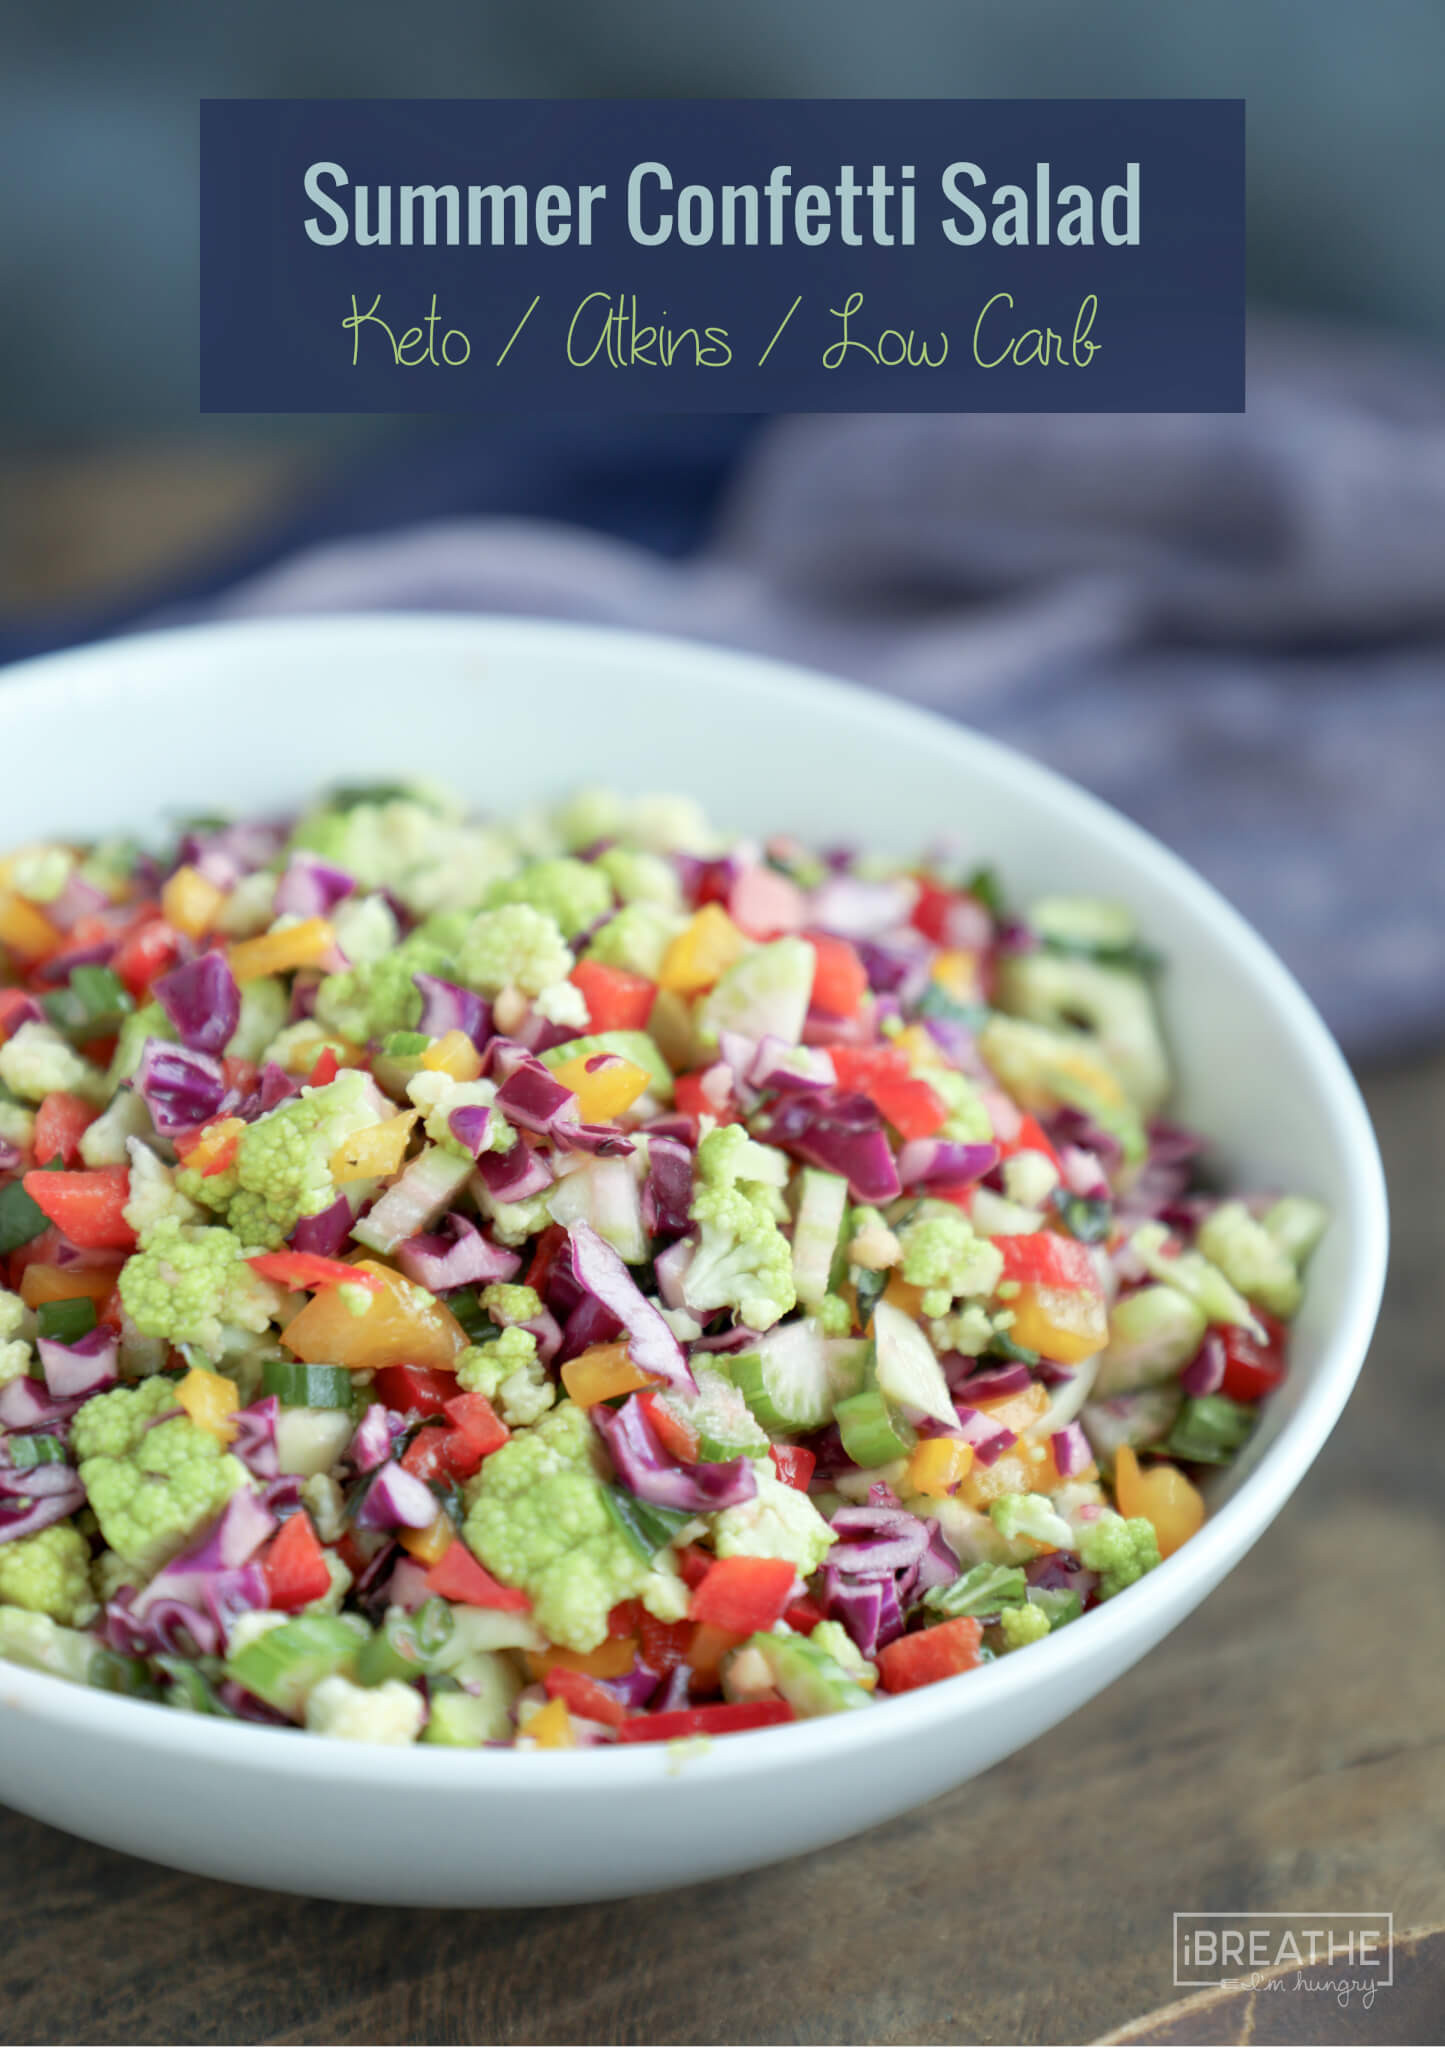 Low Carb No Dairy Recipes
 Low Carb Summer Confetti Salad